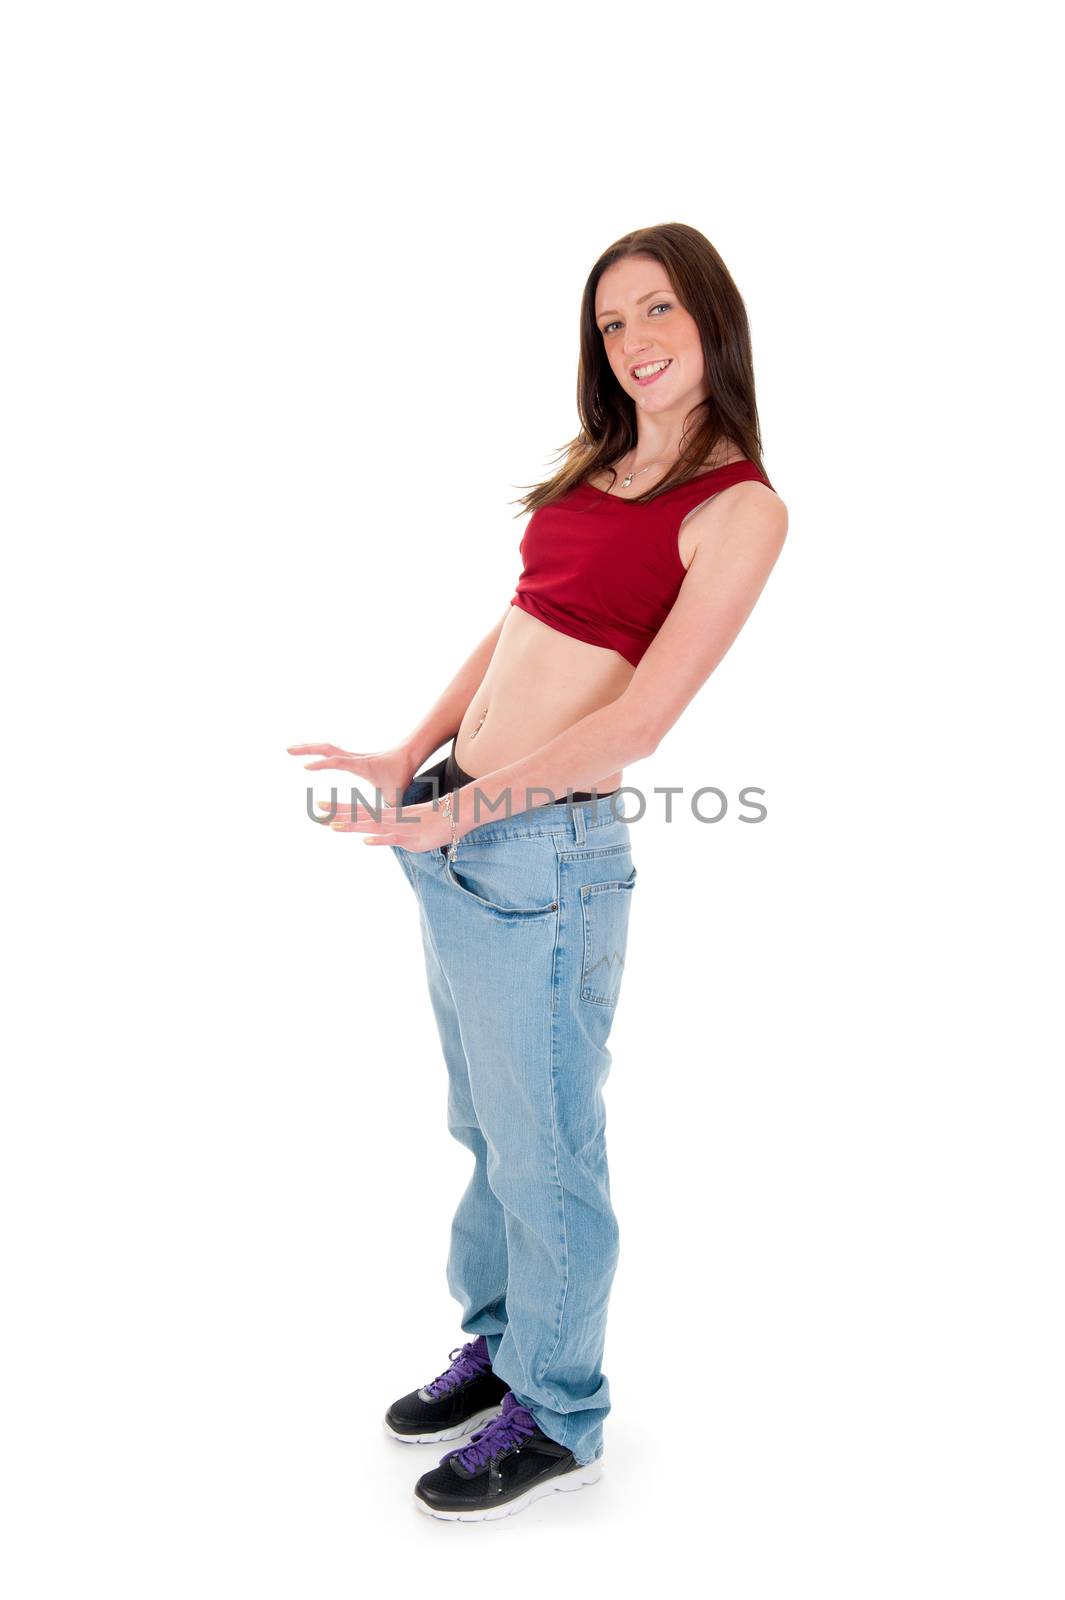 a girl celebrating her success of loosing weight